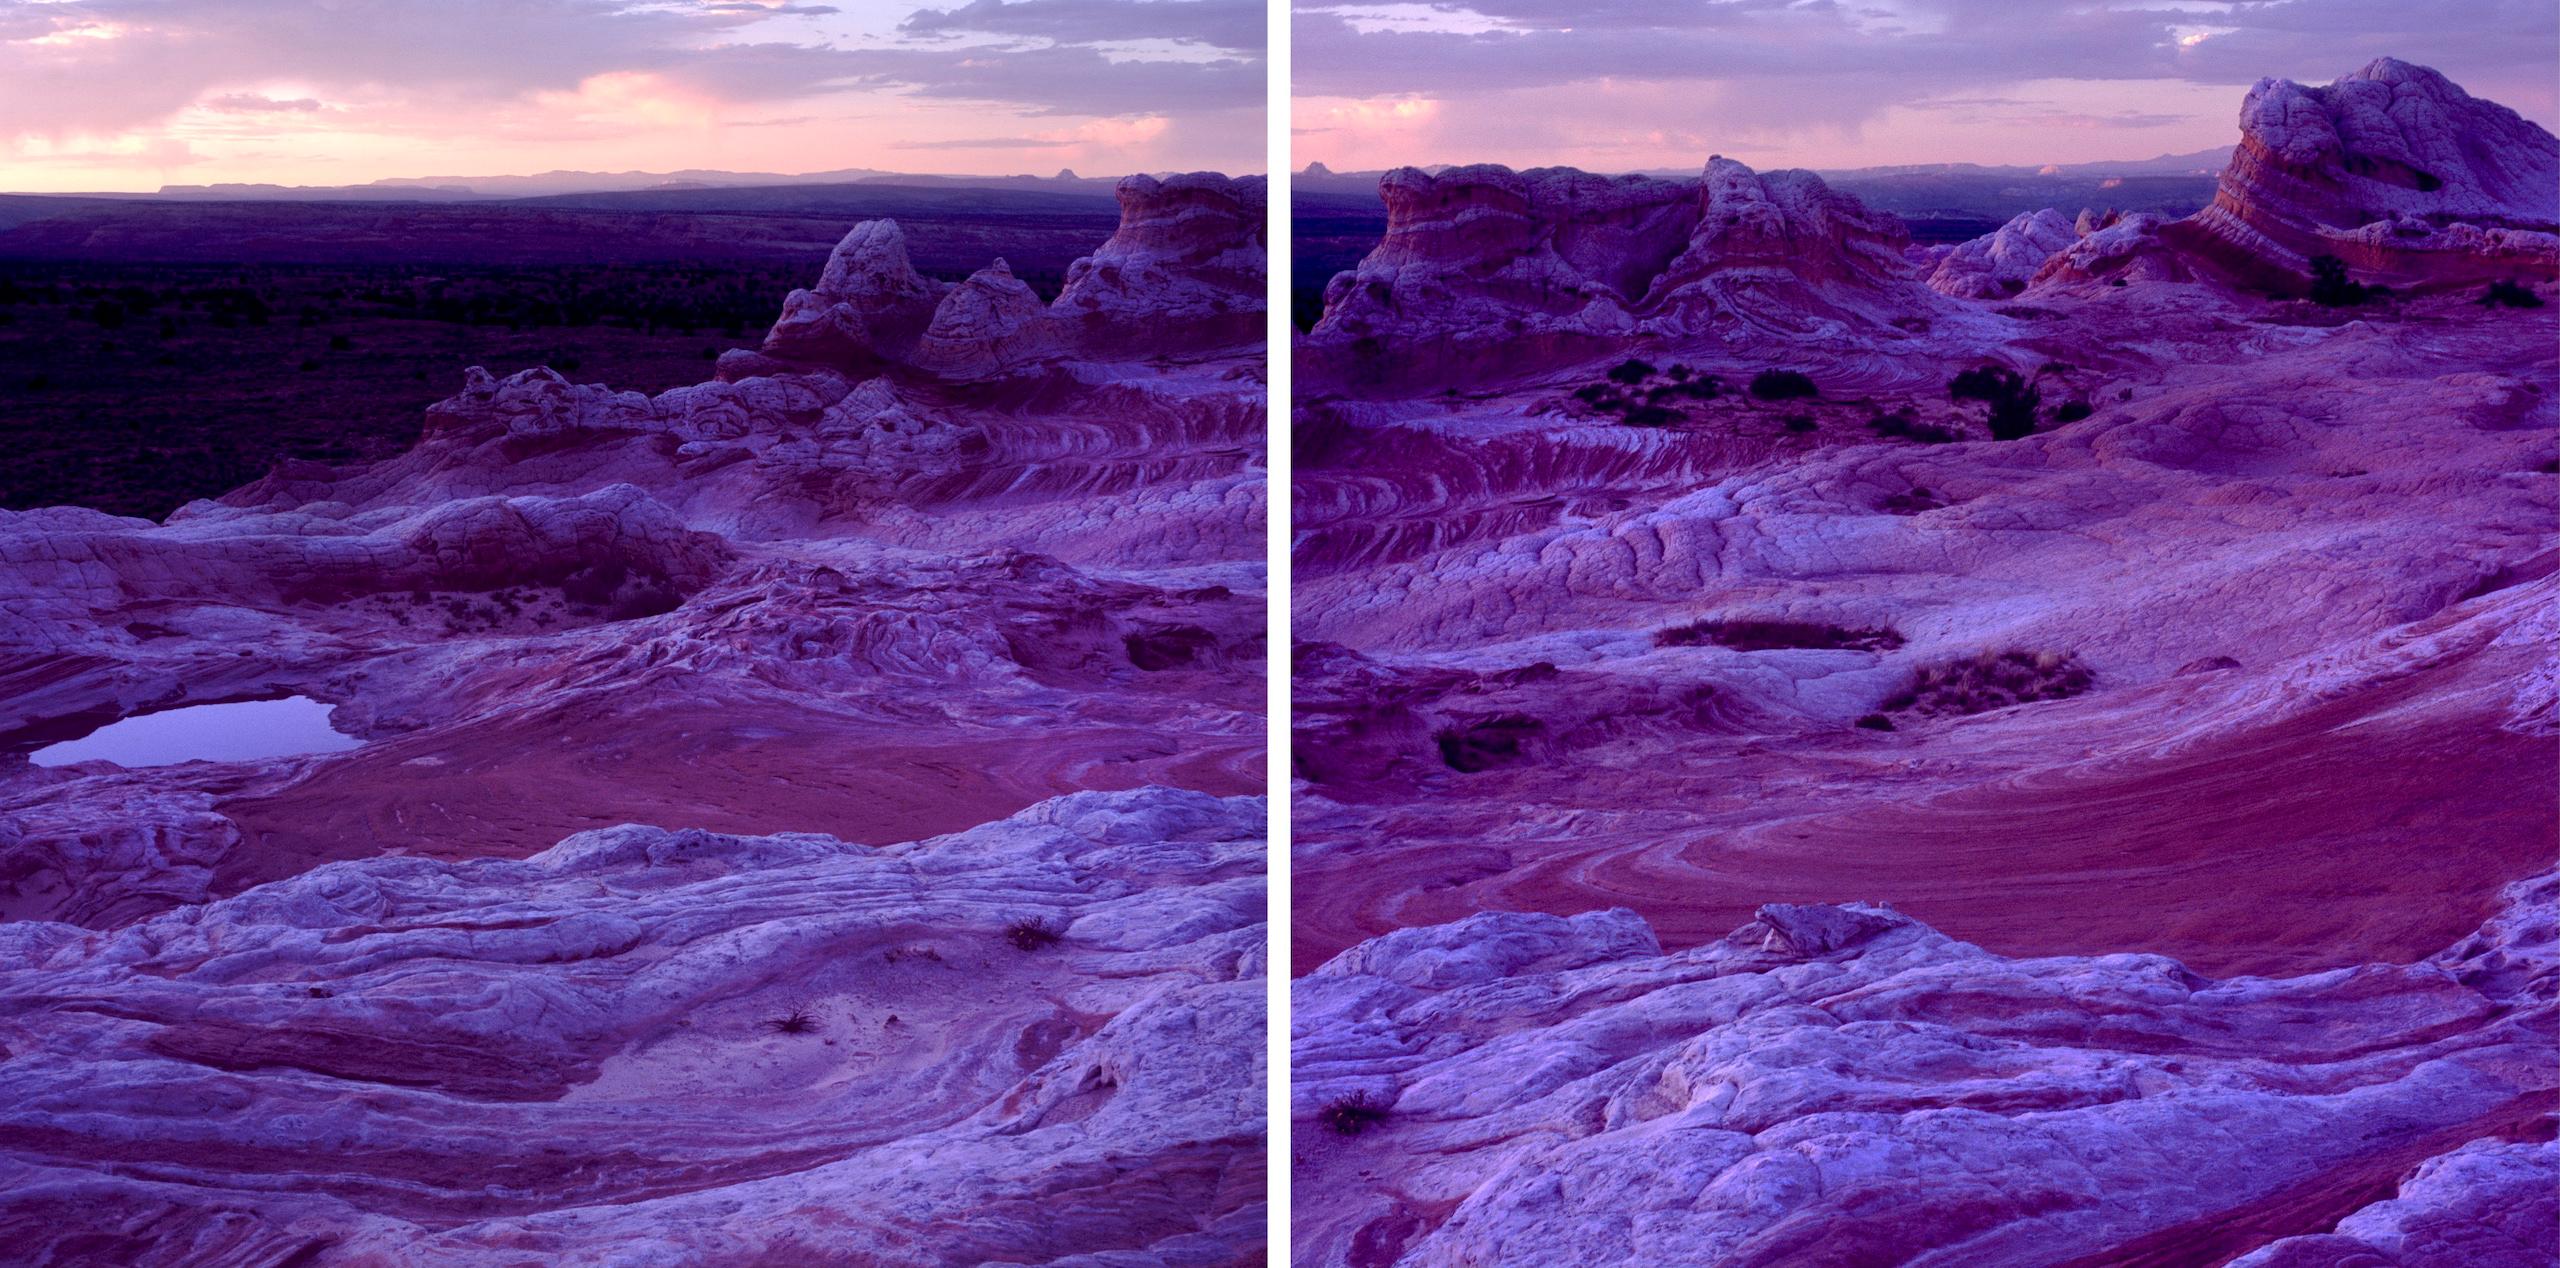 Strata V is a limited-edition diptych photograph by contemporary artist Luca Marziale. 

This photograph is sold unframed as a print only. It is available in 2 sizes:
*76.2 cm × 152.4 cm (30" × 60"), edition of 10 copies
*114.3 cm × 228.6 cm (45" ×